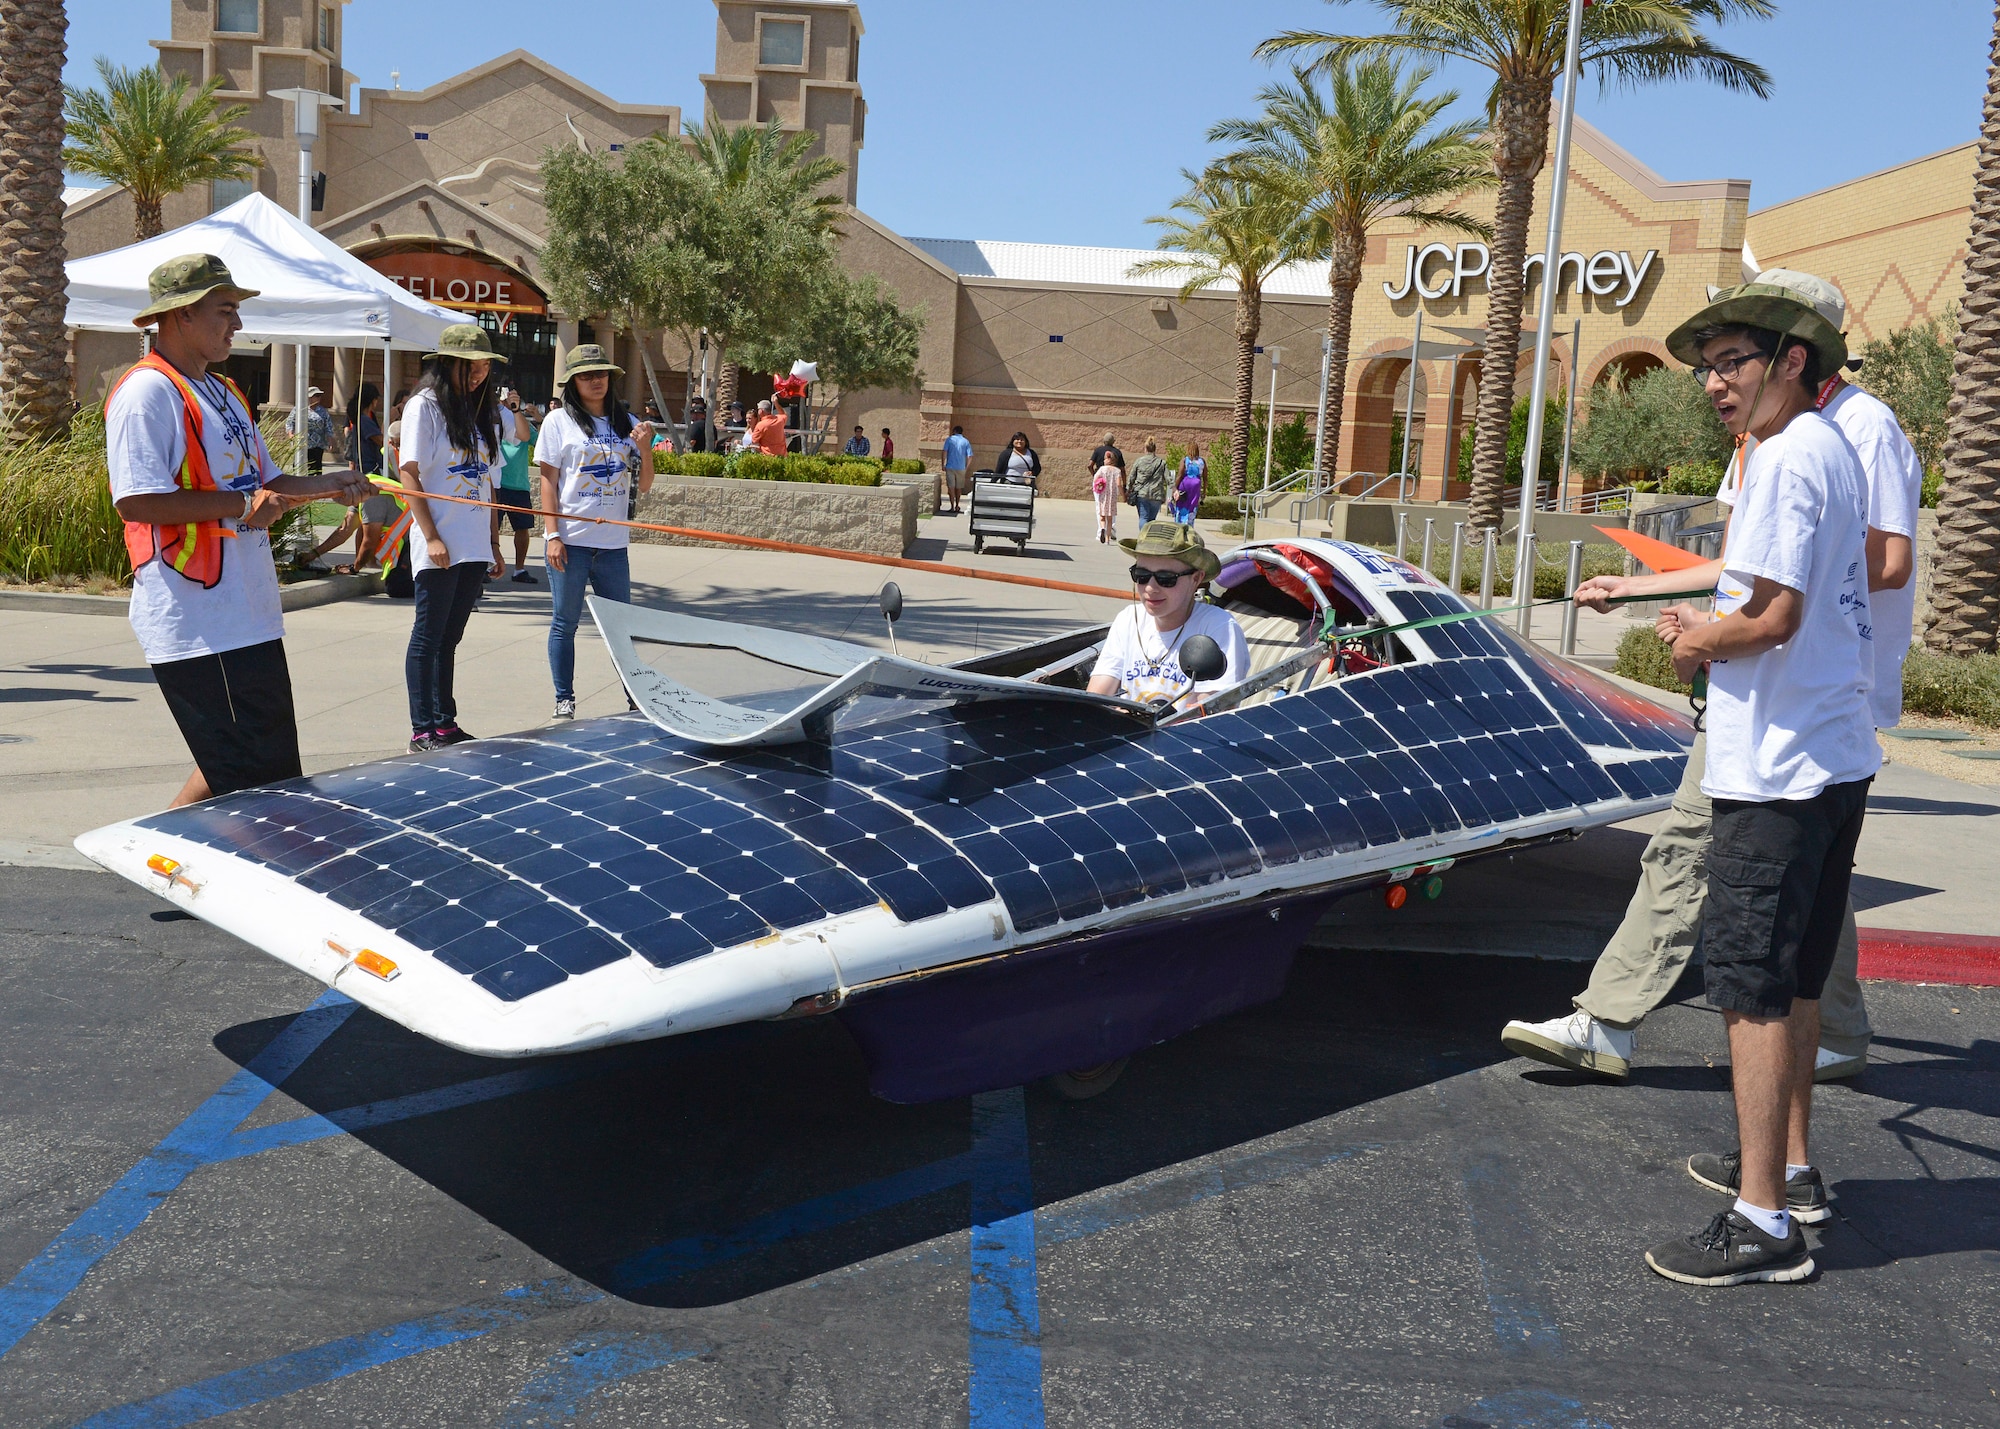 One of 26 custom-built cars that made their way across the United States on a trek that ended at the Antelope Valley Mall in Palmdale, California, July 23 for the finale of this year’s Solar Car Challenge. Each car was powered only by the sun’s energy. (U.S. Air Force photo by Kenji Thuloweit)